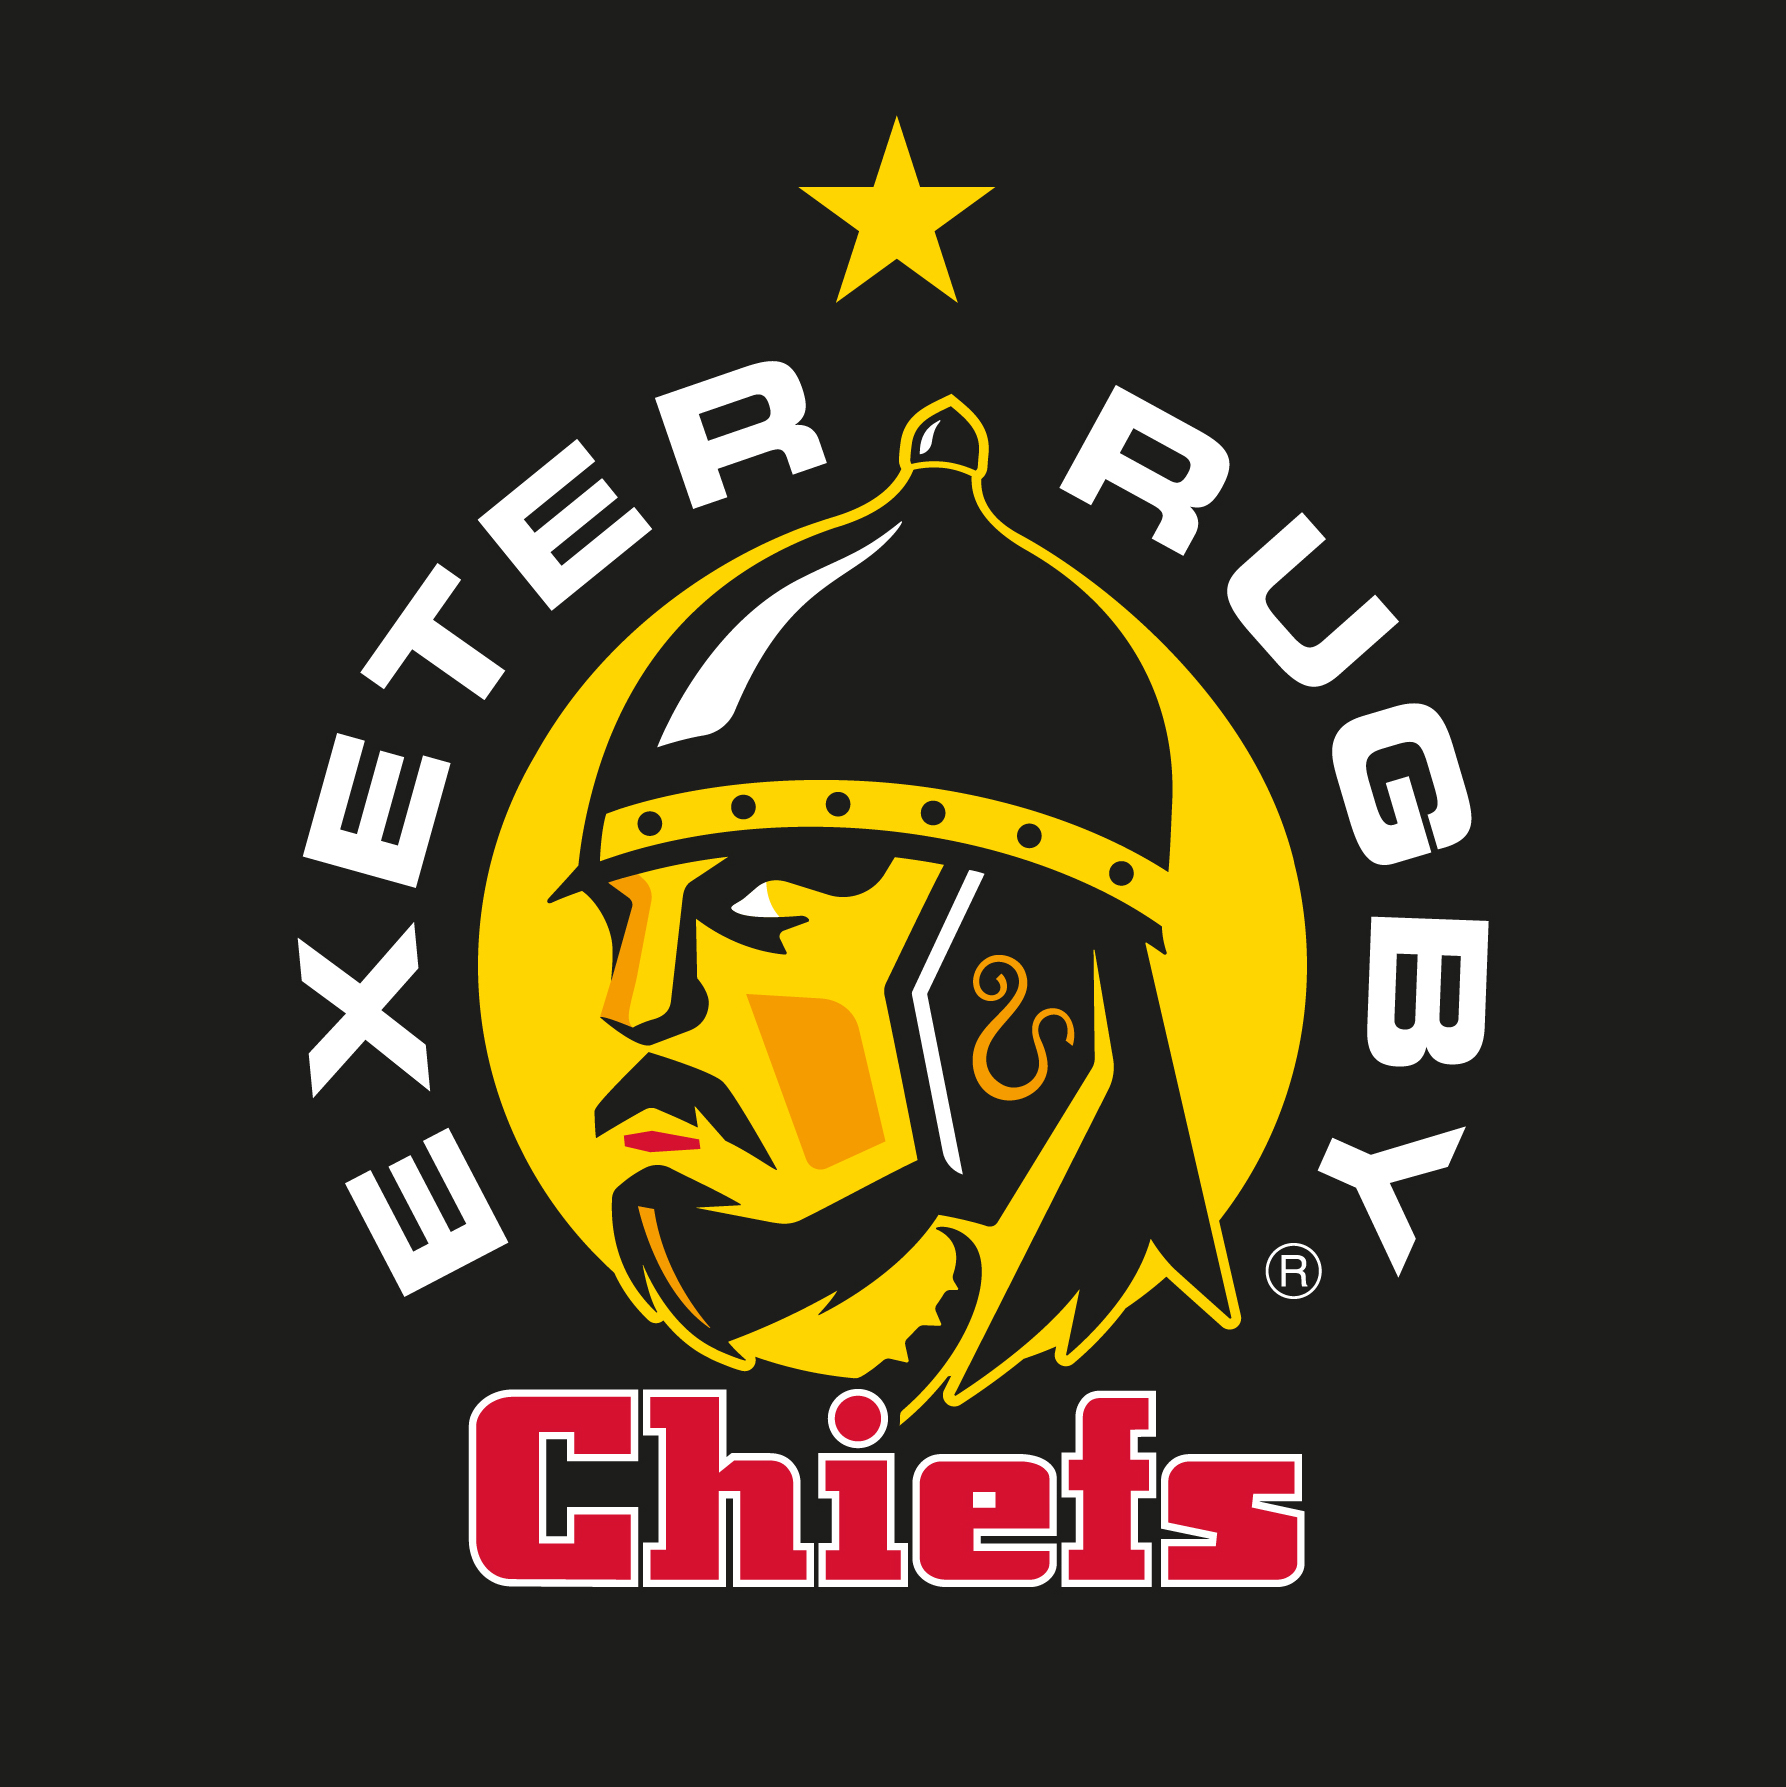 Exeter's new logo that take effect from July 